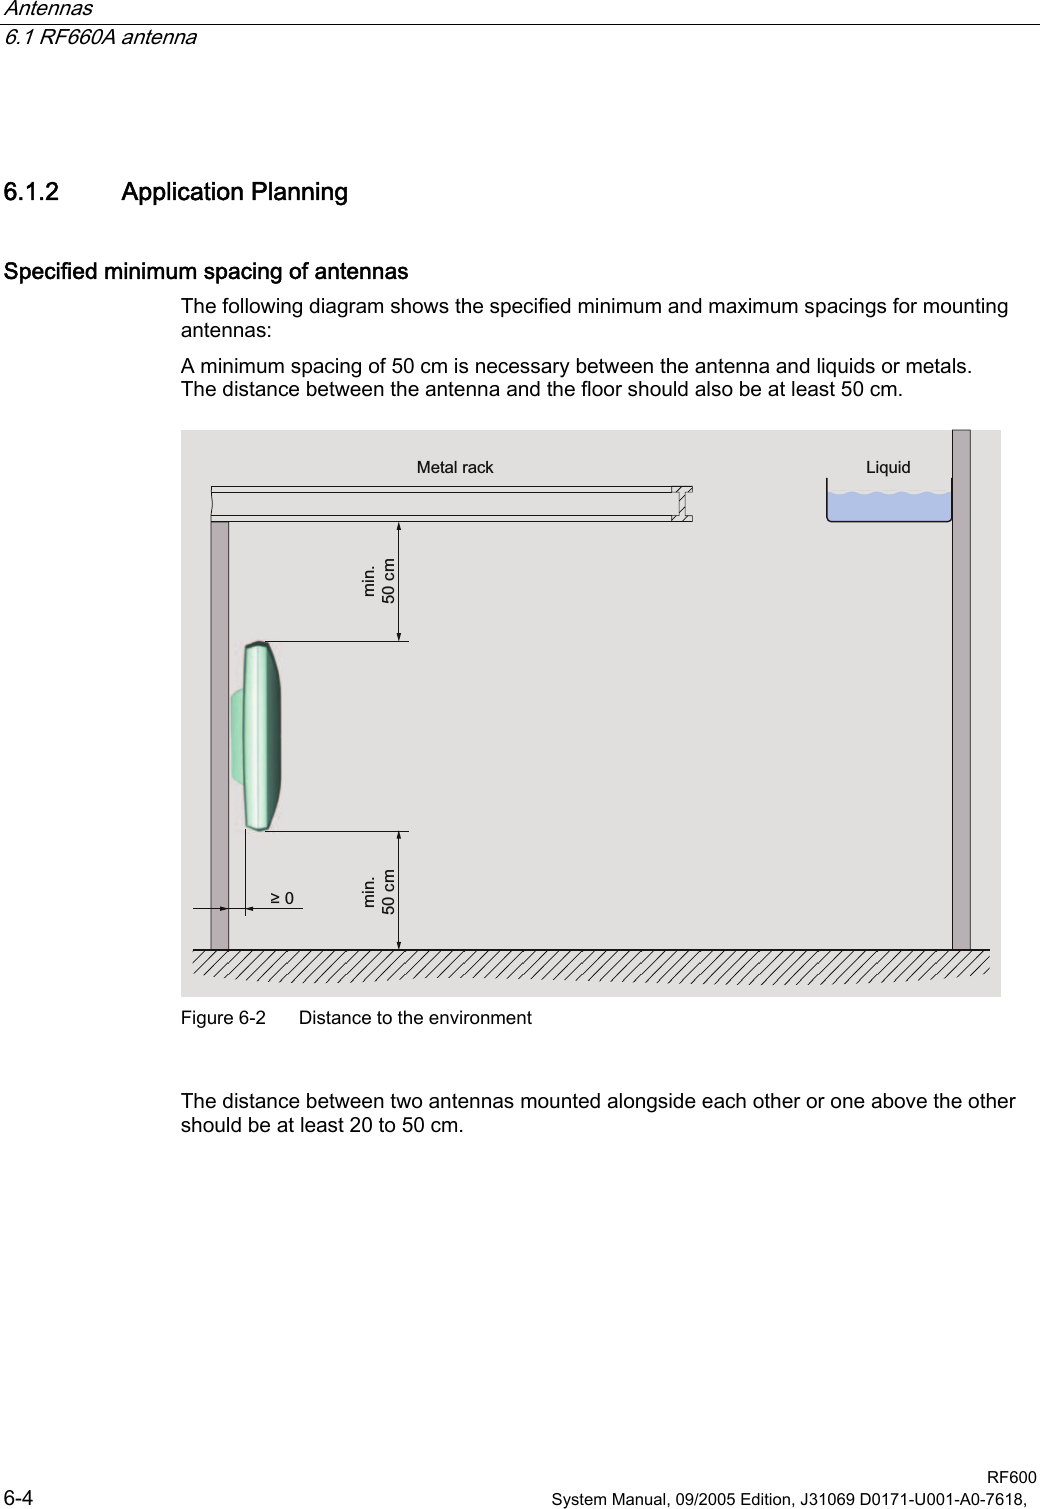 Antennas   6.1 RF660A antenna  RF600 6-4  System Manual, 09/2005 Edition, J31069 D0171-U001-A0-7618,   6.1.2 Application Planning Specified minimum spacing of antennas The following diagram shows the specified minimum and maximum spacings for mounting antennas:  A minimum spacing of 50 cm is necessary between the antenna and liquids or metals. The distance between the antenna and the floor should also be at least 50 cm. PLQFPPLQFPุ0HWDOUDFN /LTXLG Figure 6-2  Distance to the environment  The distance between two antennas mounted alongside each other or one above the other should be at least 20 to 50 cm. 